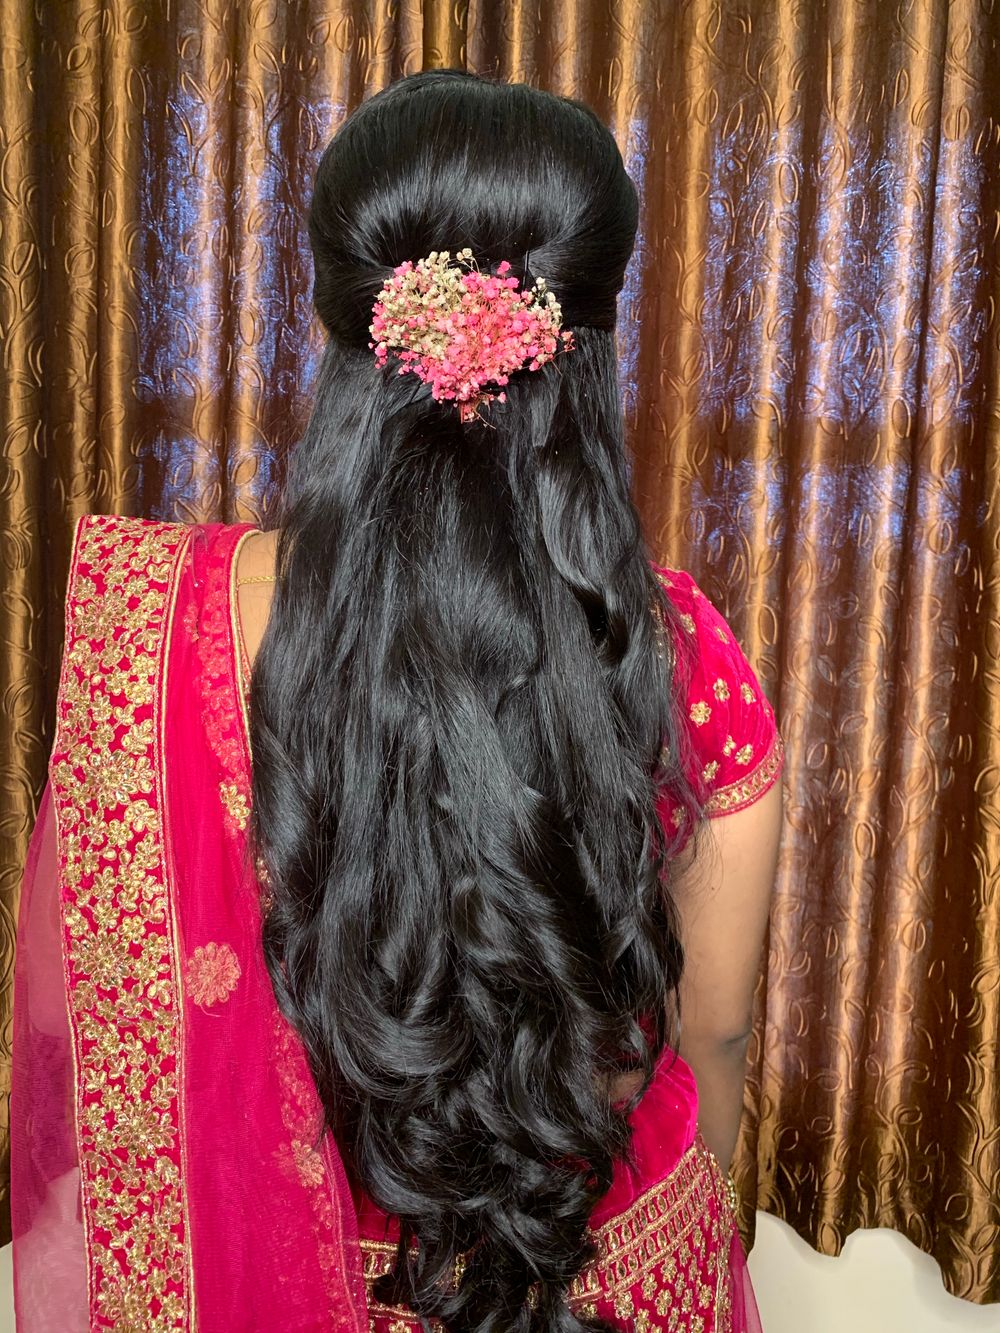 Photo From Reception hairdos - By Megla Makeup and Design